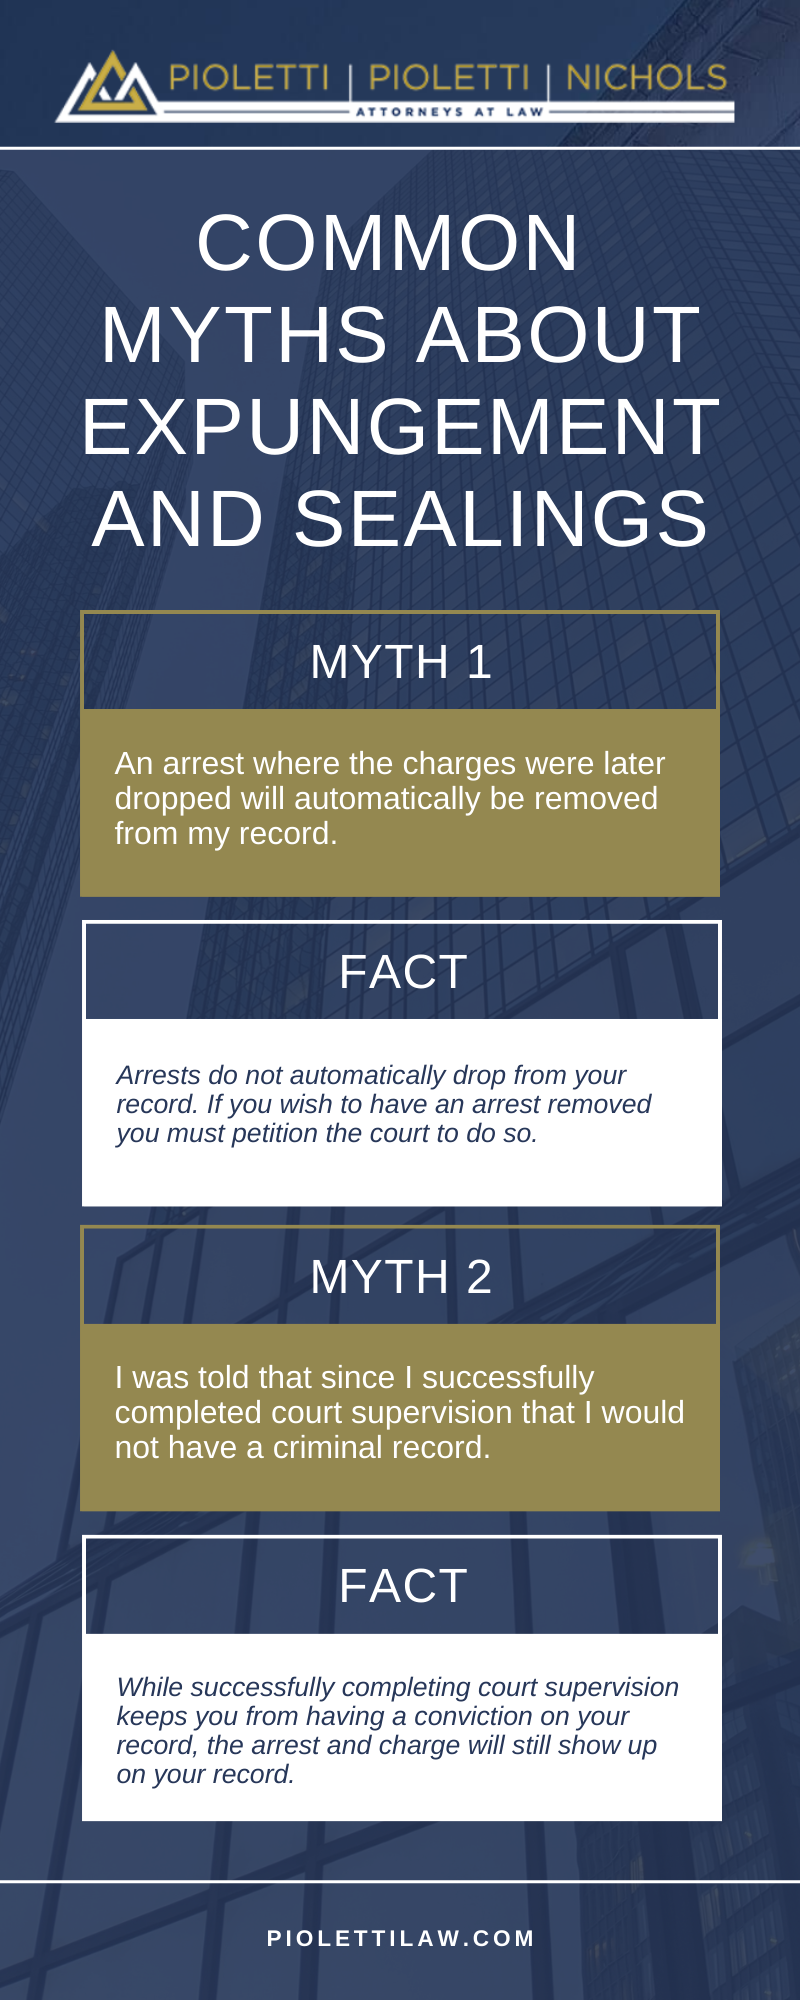 Common Myths About Expungement And Sealings Infographic